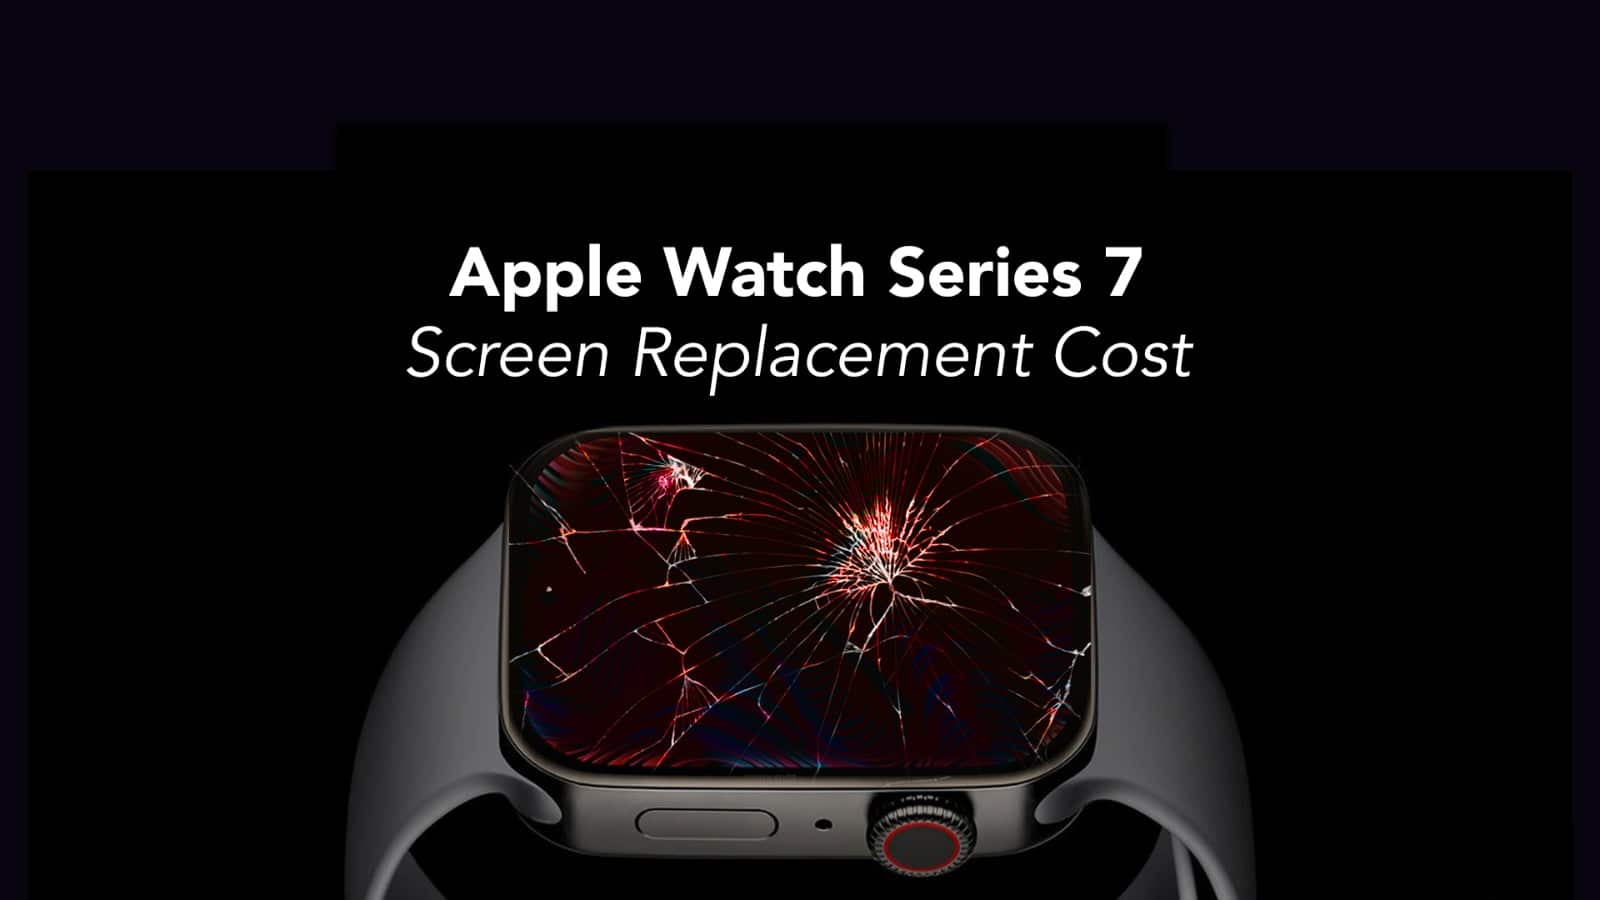 Apple Watch Series 7 for a screen replacement service